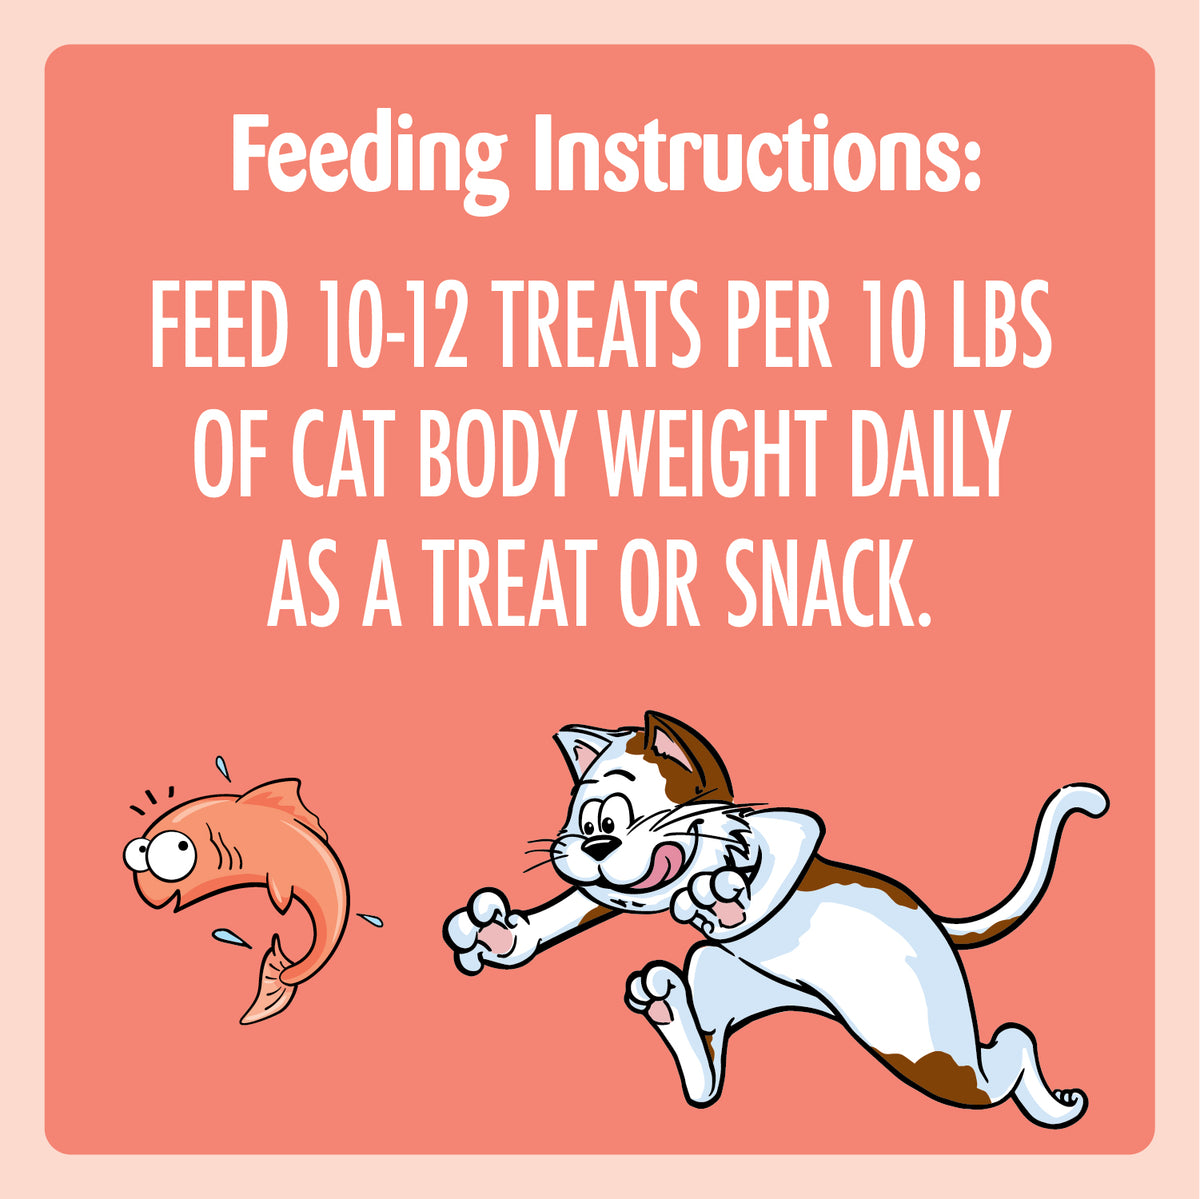 [Temptations][TEMPTATIONS Meaty Bites, Soft and Savory Cat Treats, Salmon Flavor, 4.1 oz. Pouch][Feeding Guidelines Image]